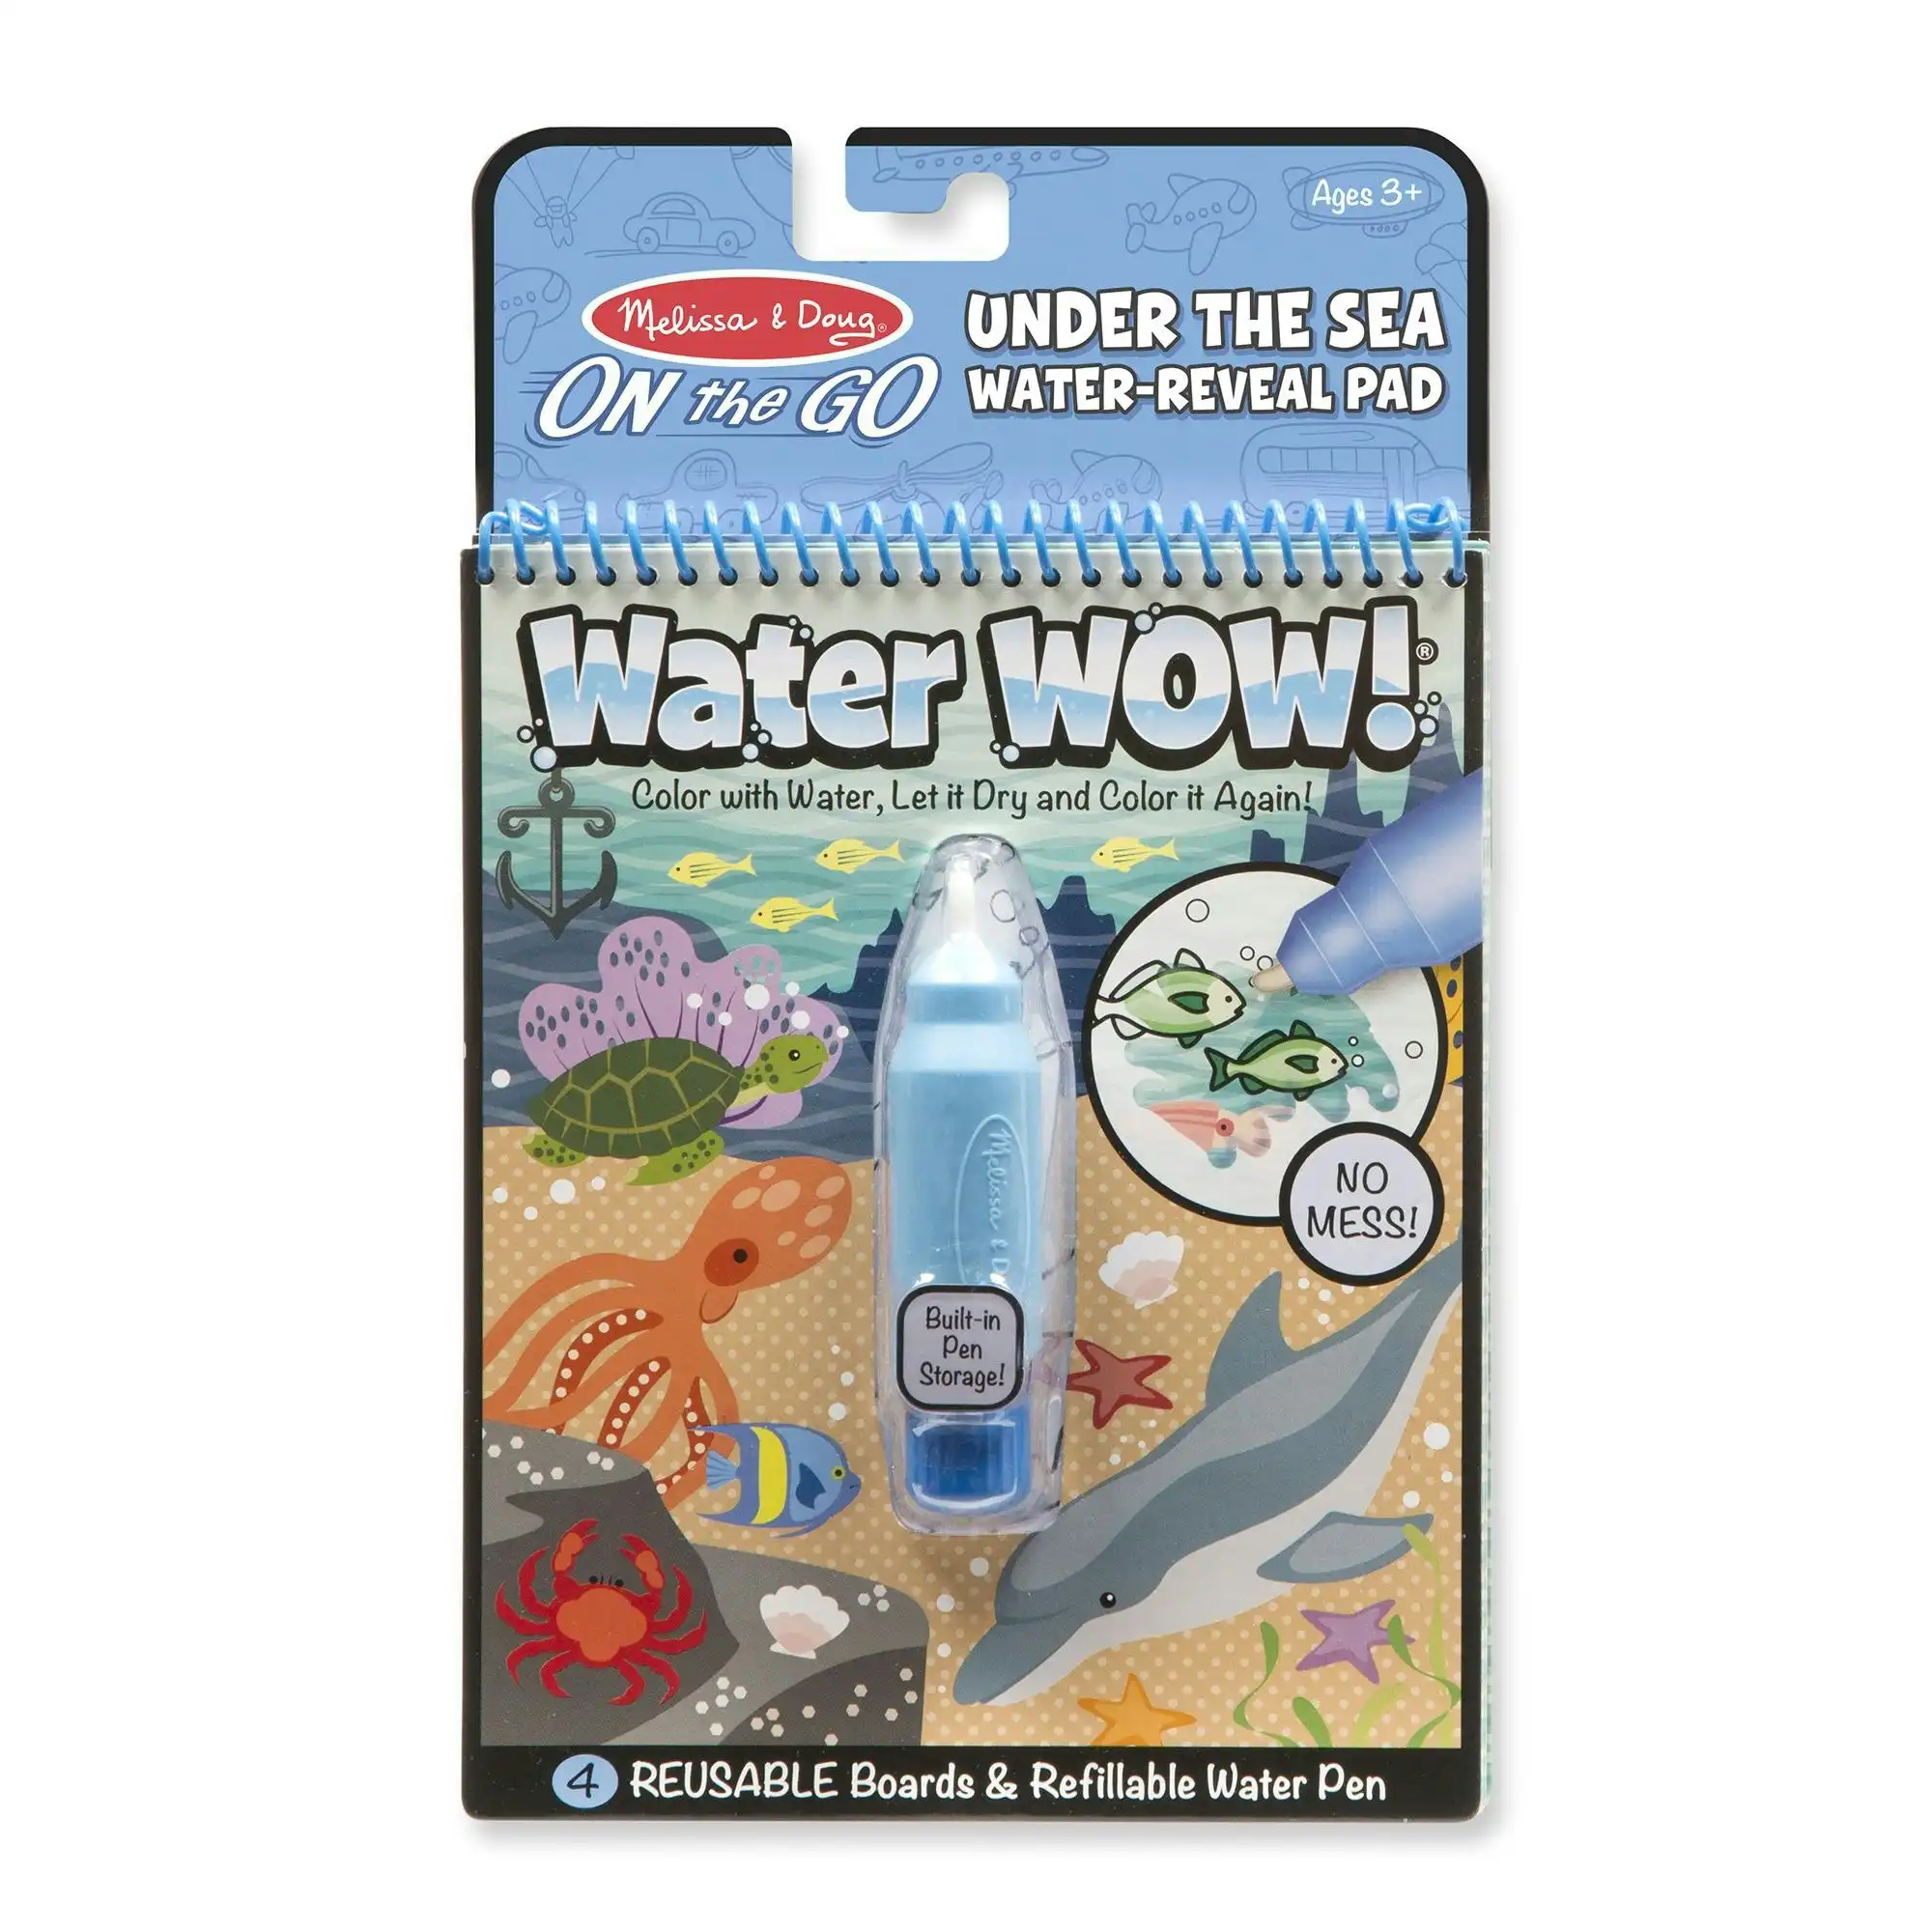 Melissa & Doug - Water Wow! - Under The Sea Water Reveal Pad - On The Go Travel Activity